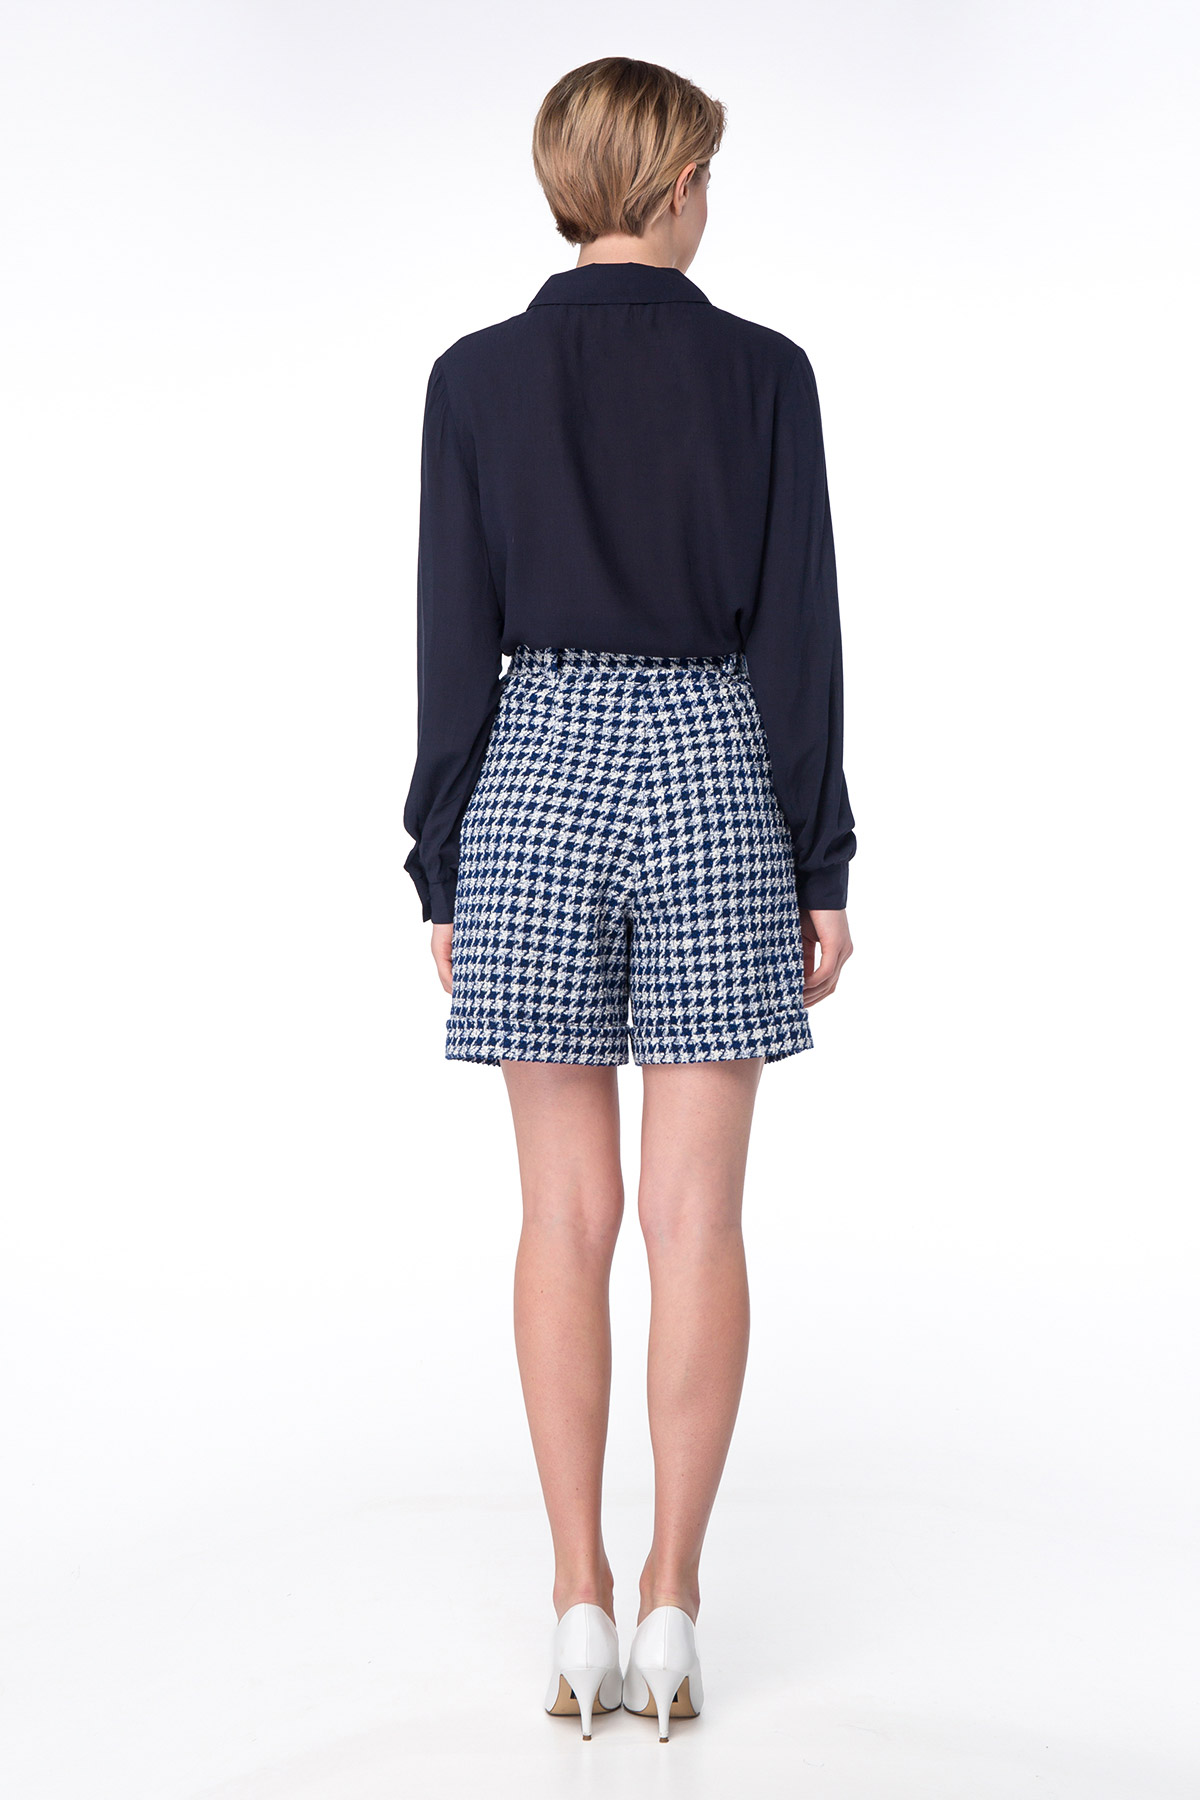 Shorts with blue&white houndstooth print, photo 3